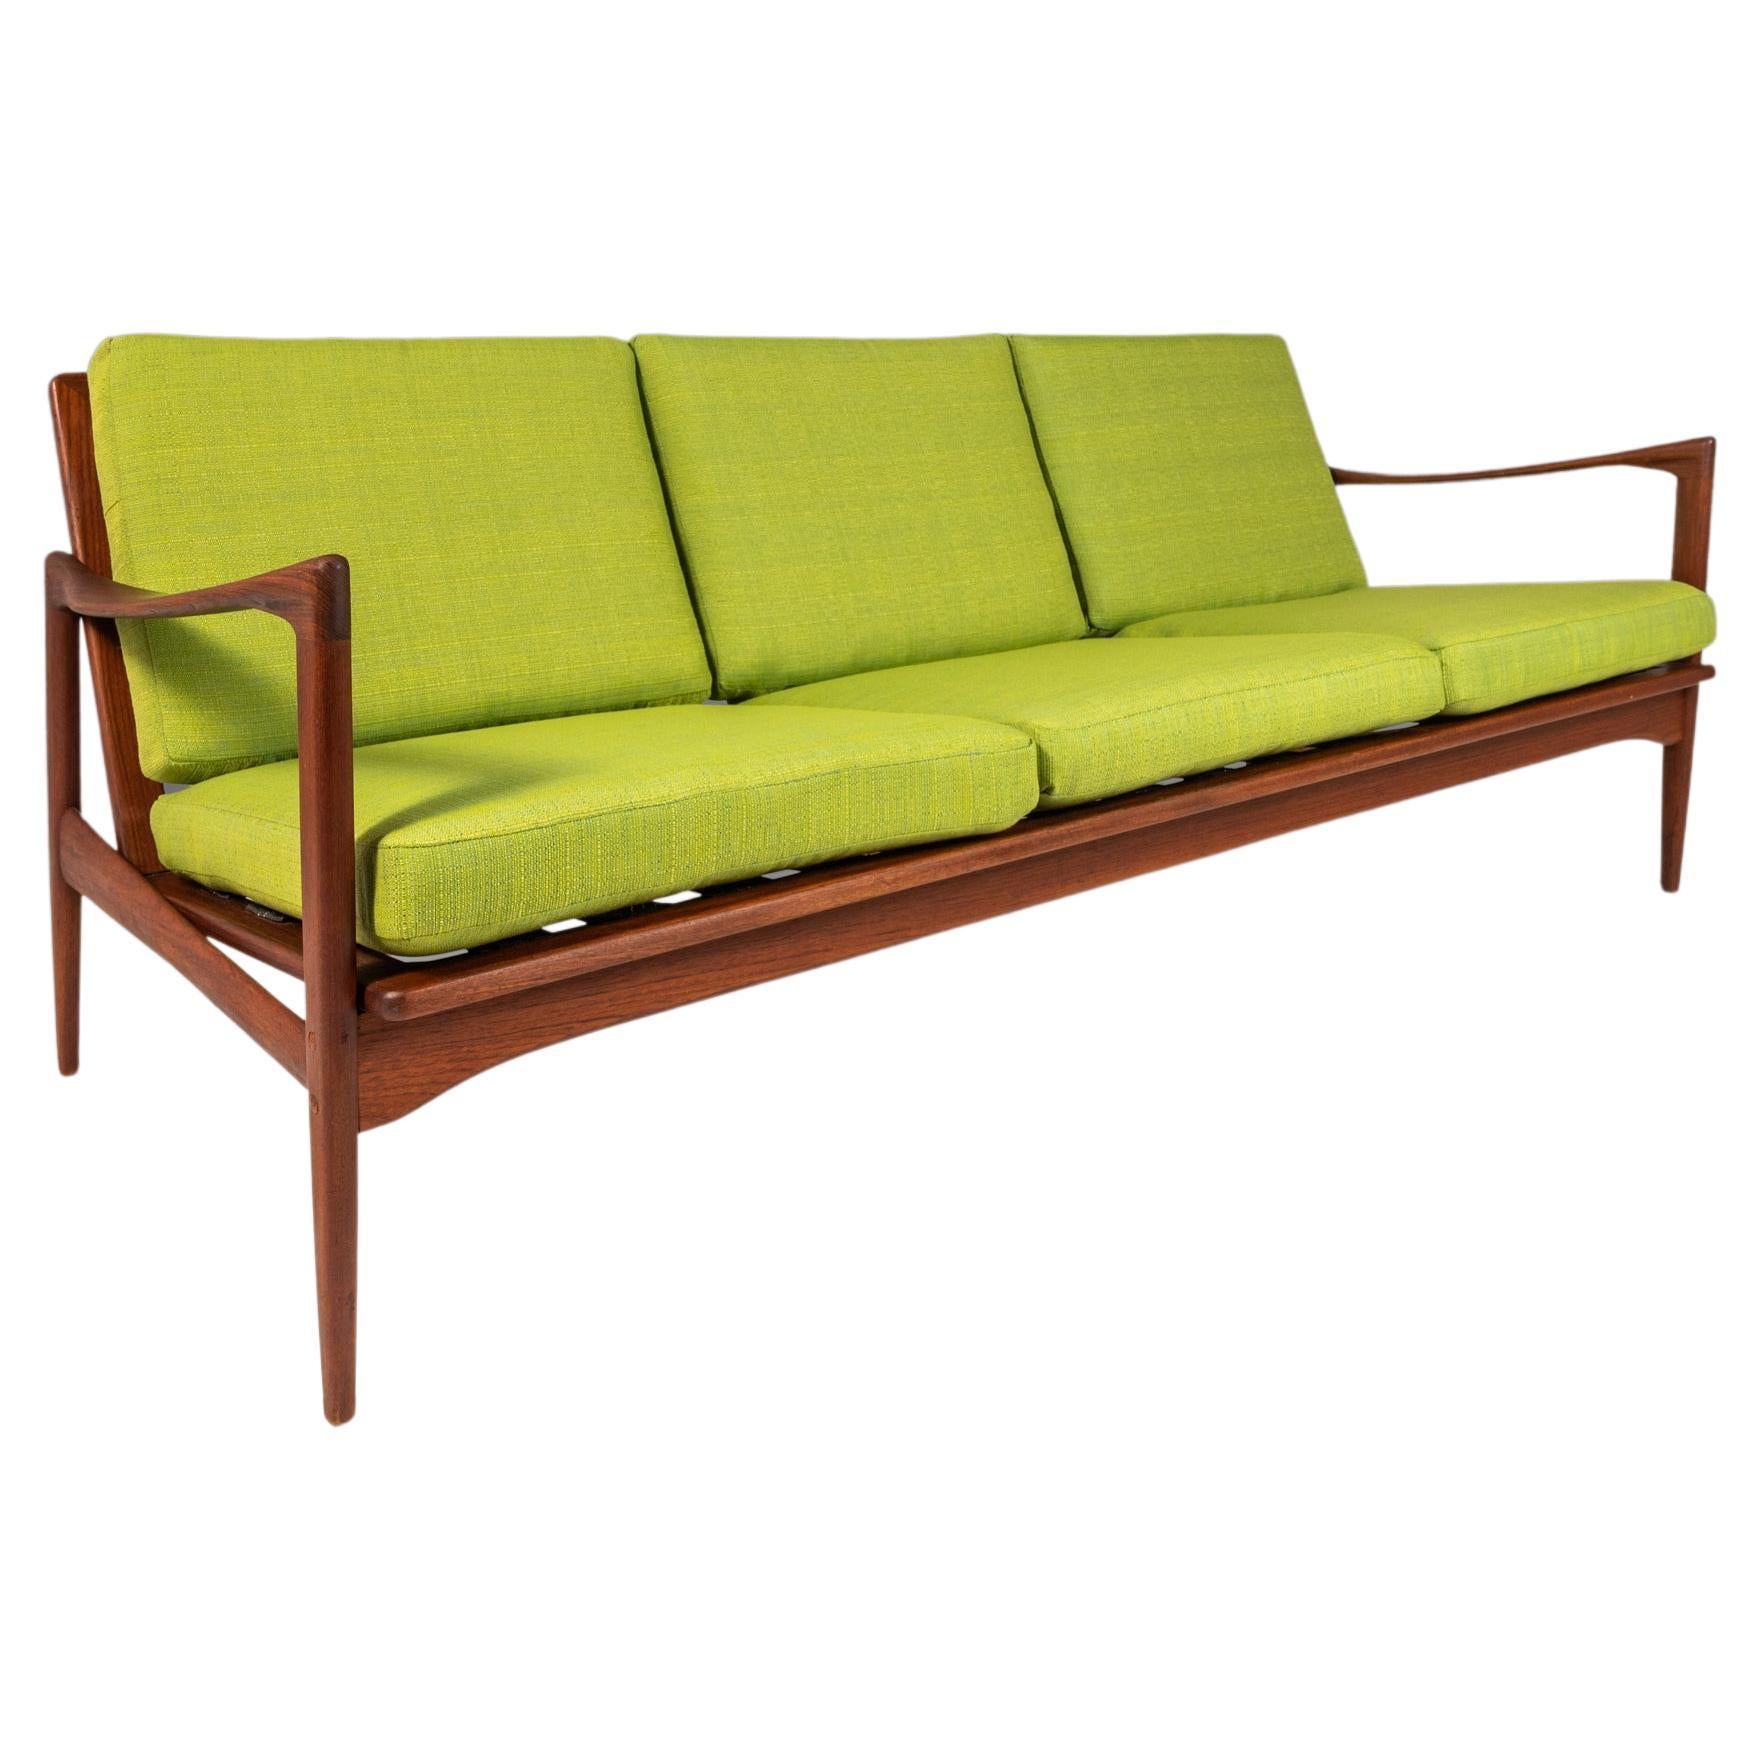 Kandidaten 3 Seat Sofa by Ib Kofod-Larsen for Olof Persons 'OPE', Sweden, 1960s For Sale